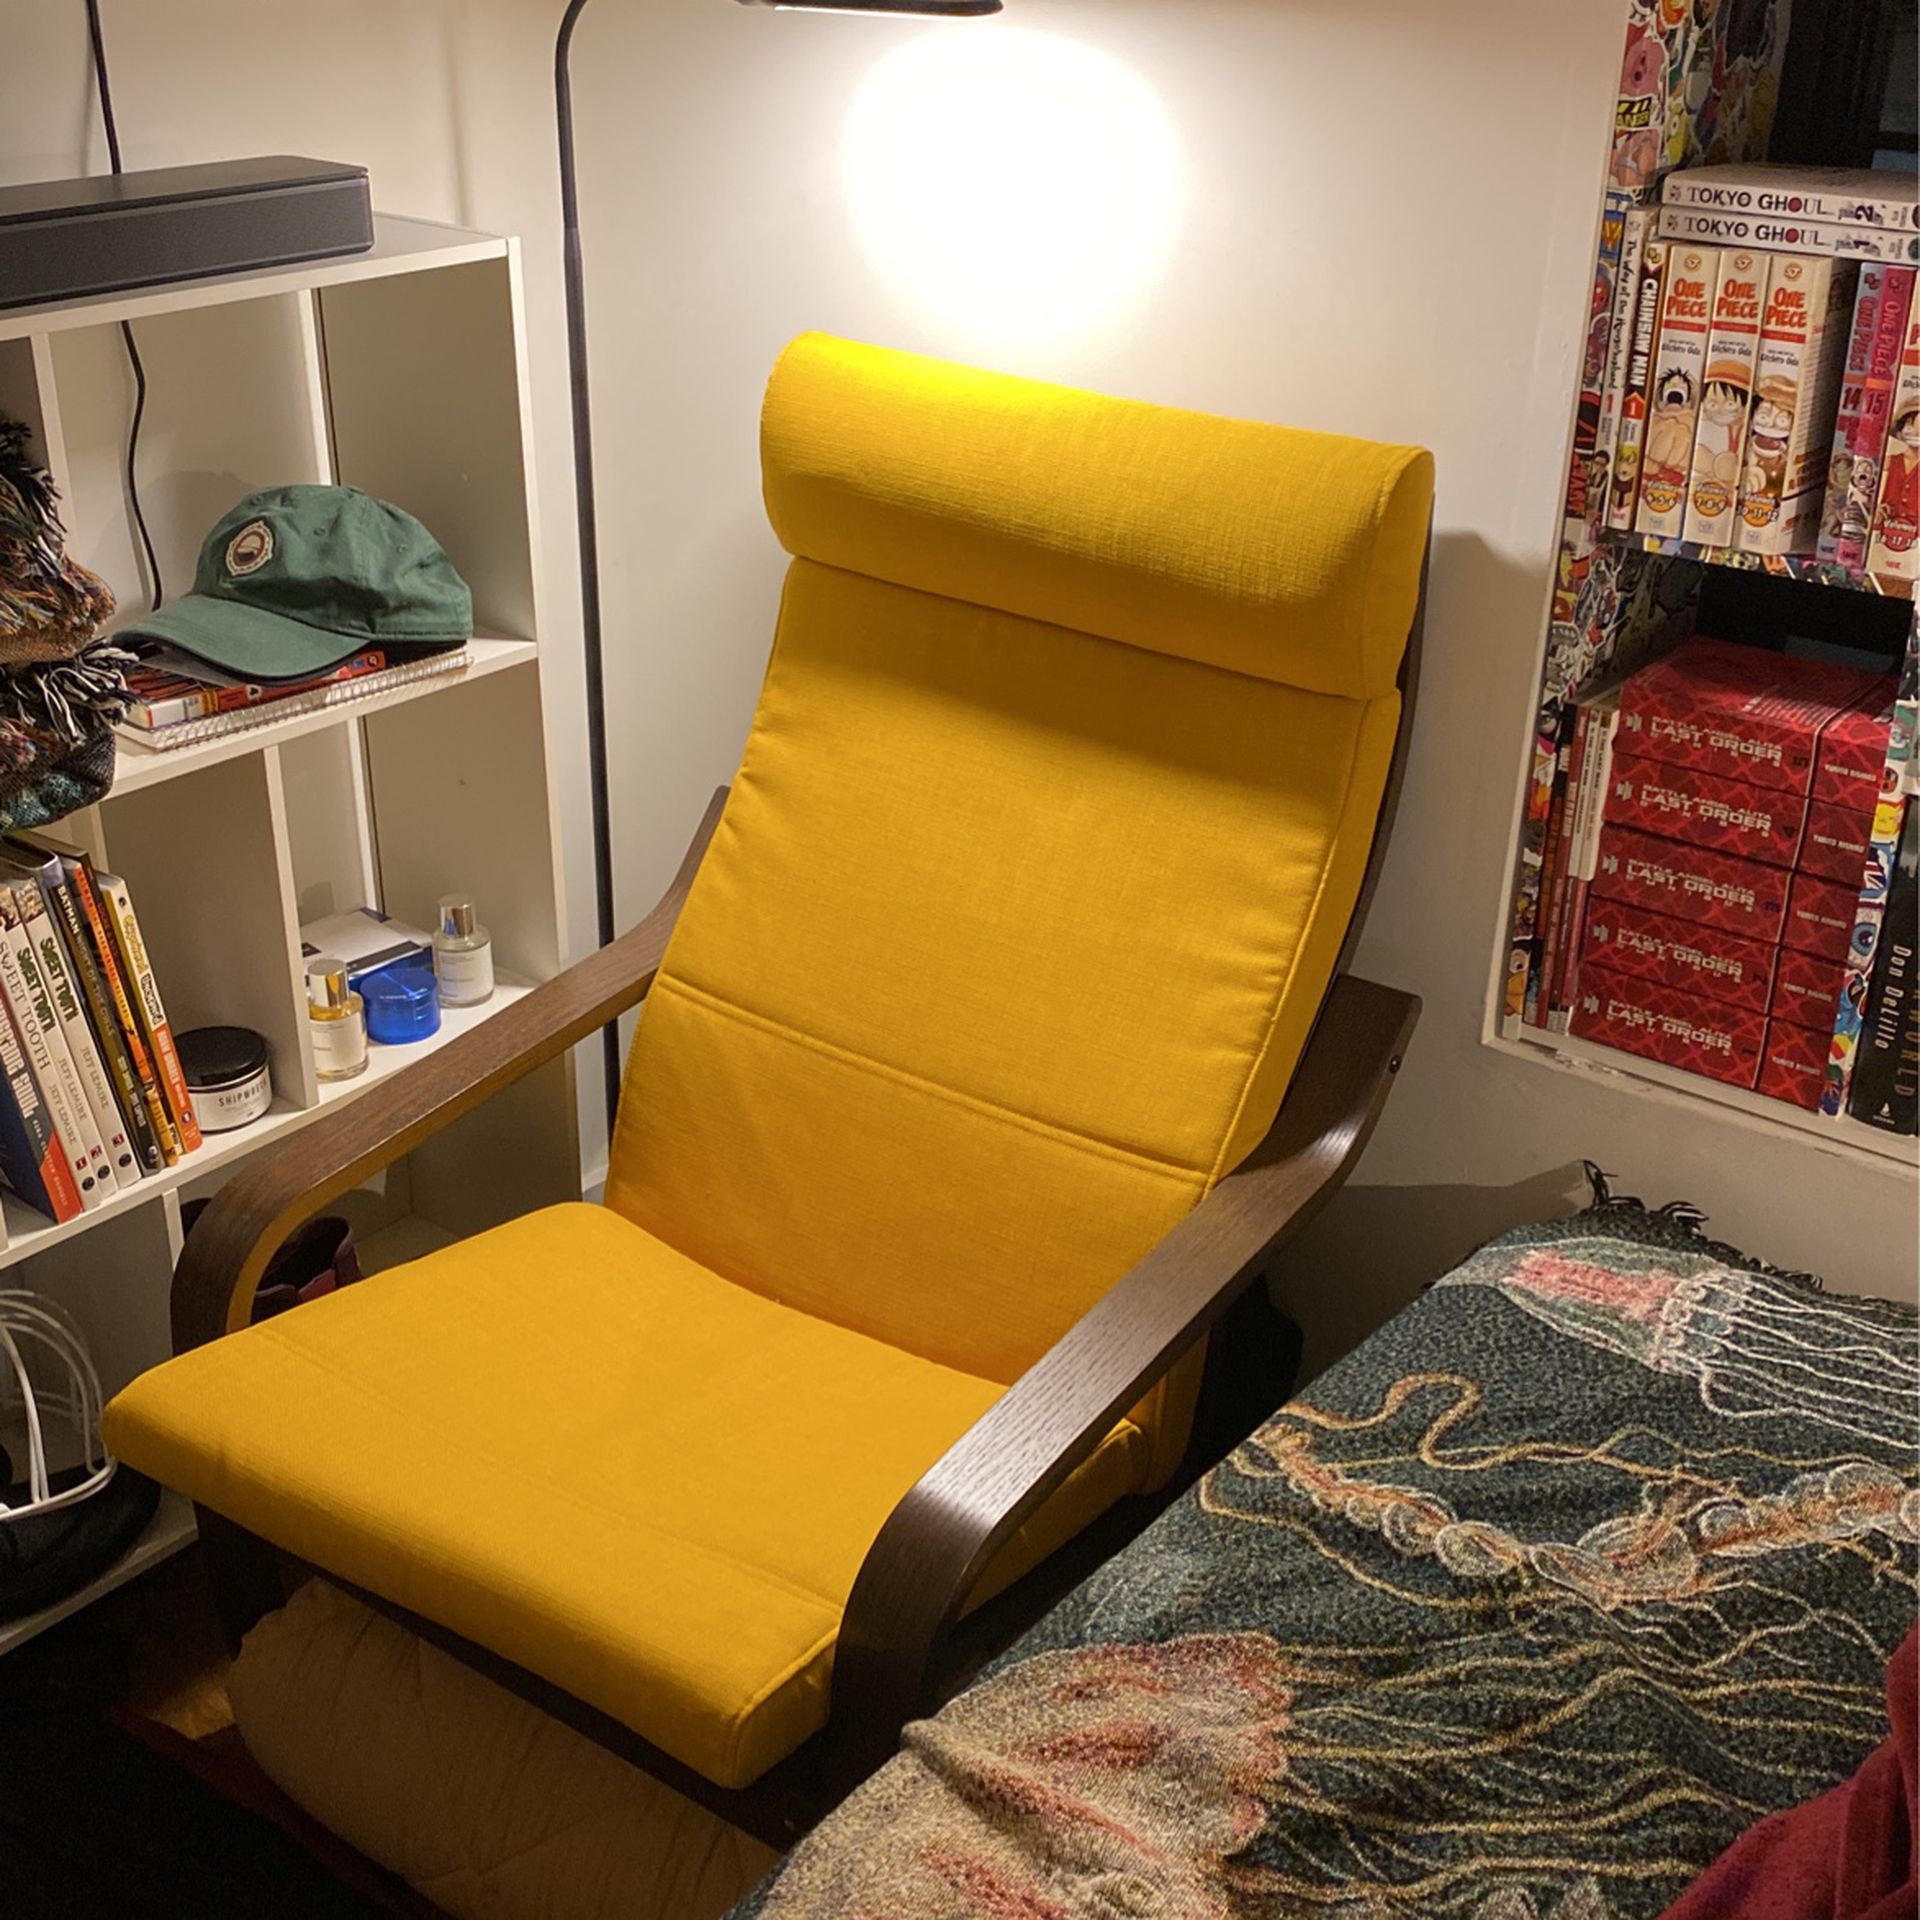 Ikea Poang Chair Armchair and Footstool Set with Covers Off-white -  furniture - by owner - sale - craigslist